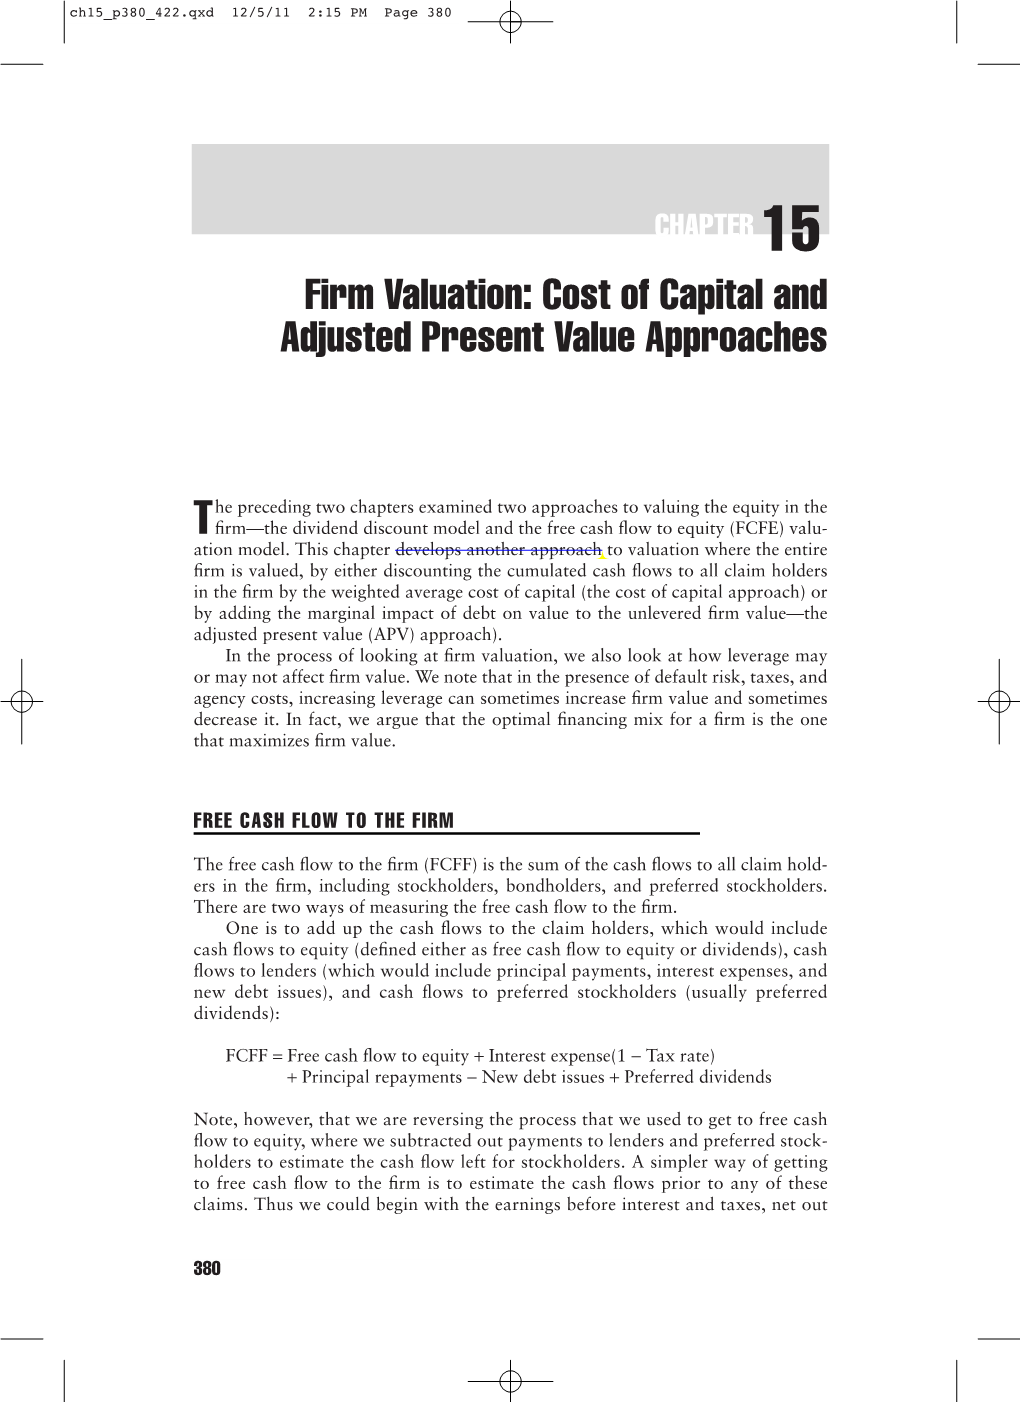 Firm Valuation: Cost of Capital and Adjusted Present Value Approaches